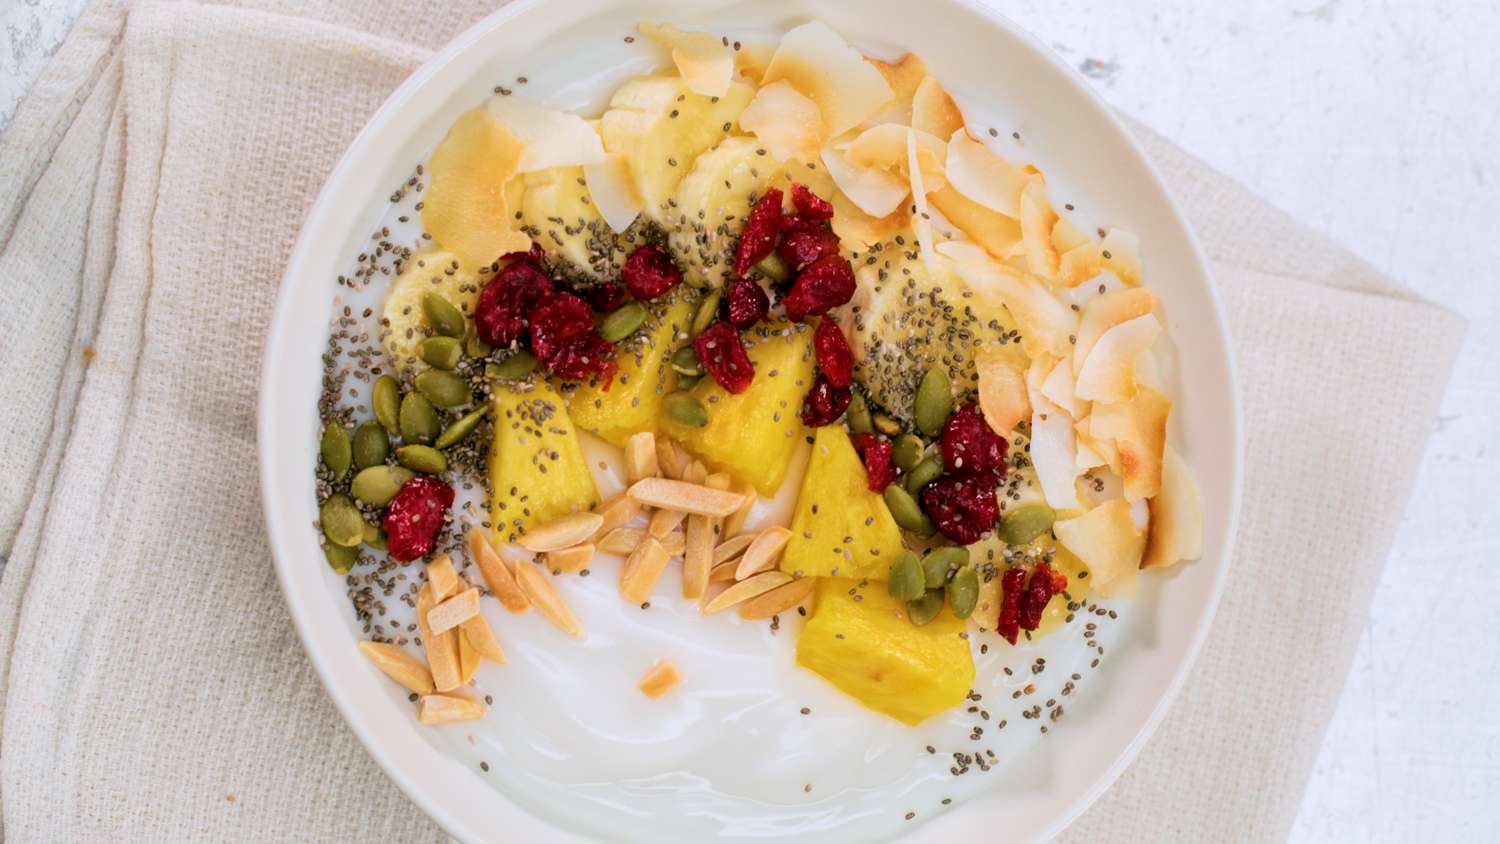 yogurt bowl with fruit and seeds from above